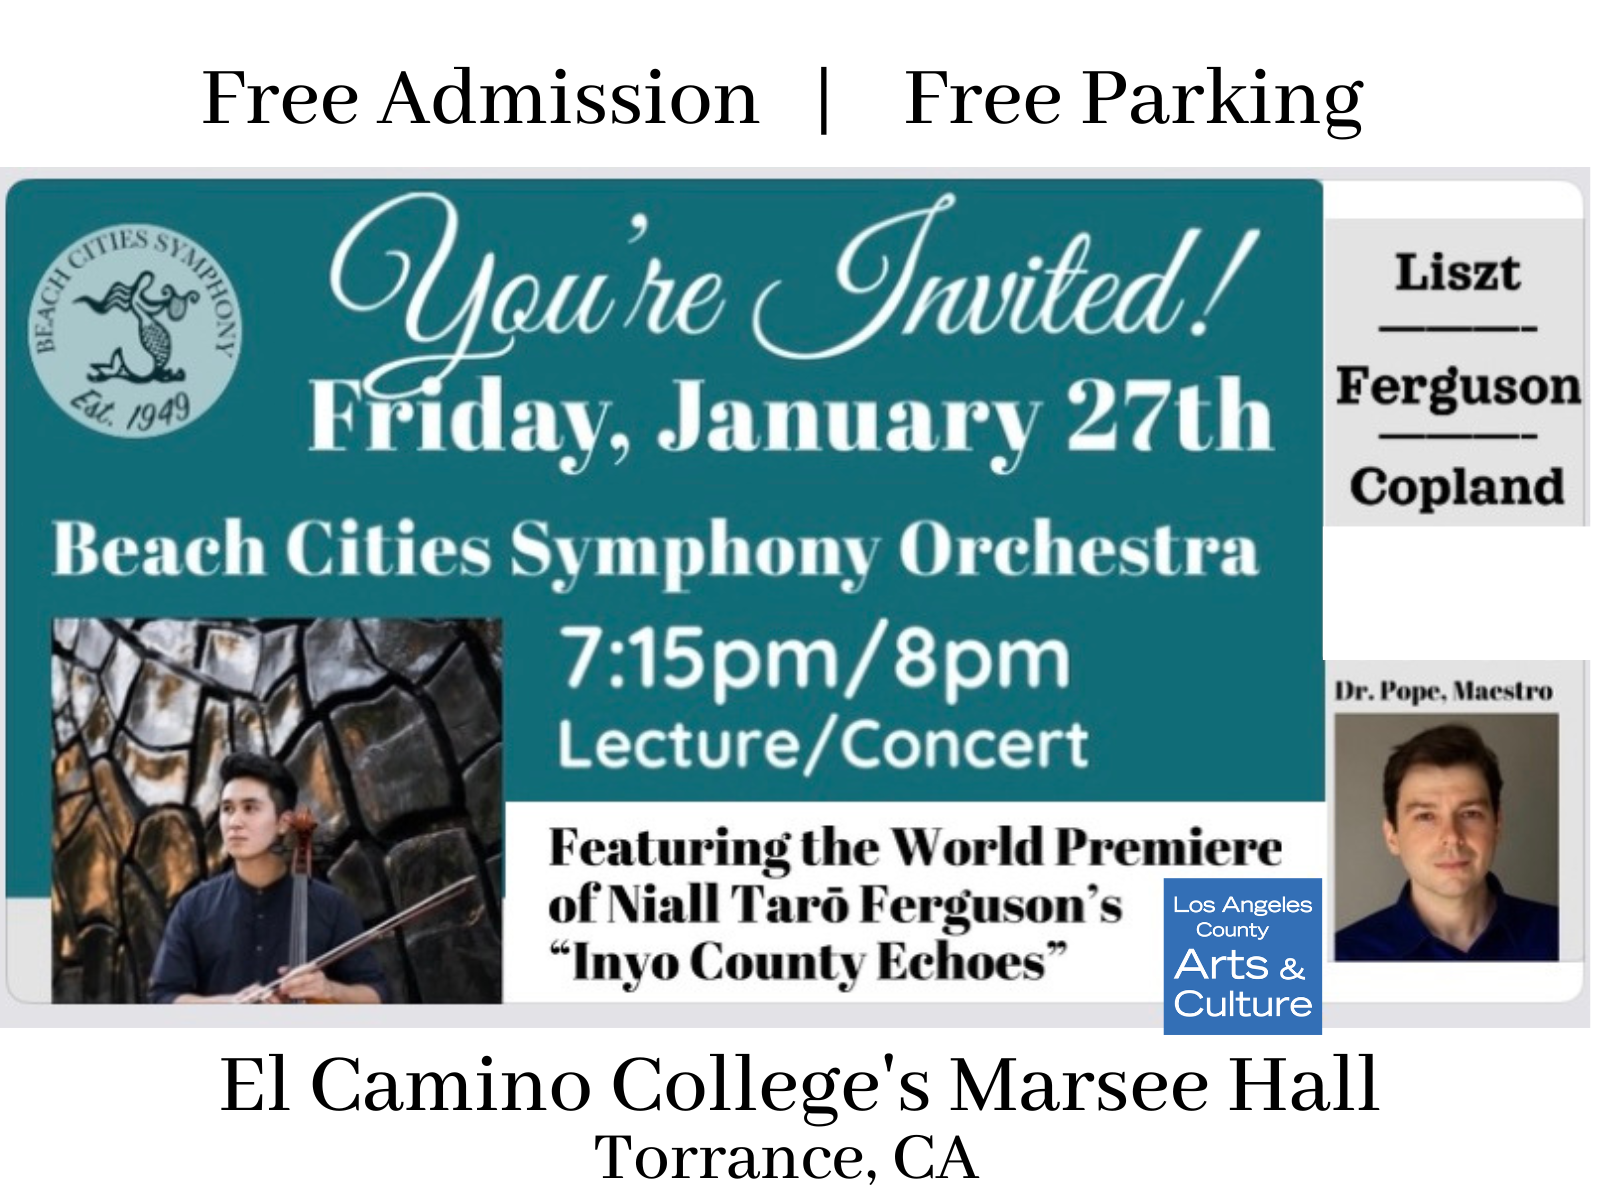 Beach Cities Symphony Concert Jan 27th - Feat. Works by Liszt, Copland and World Premiere by local composer, Niall Taro Ferguson